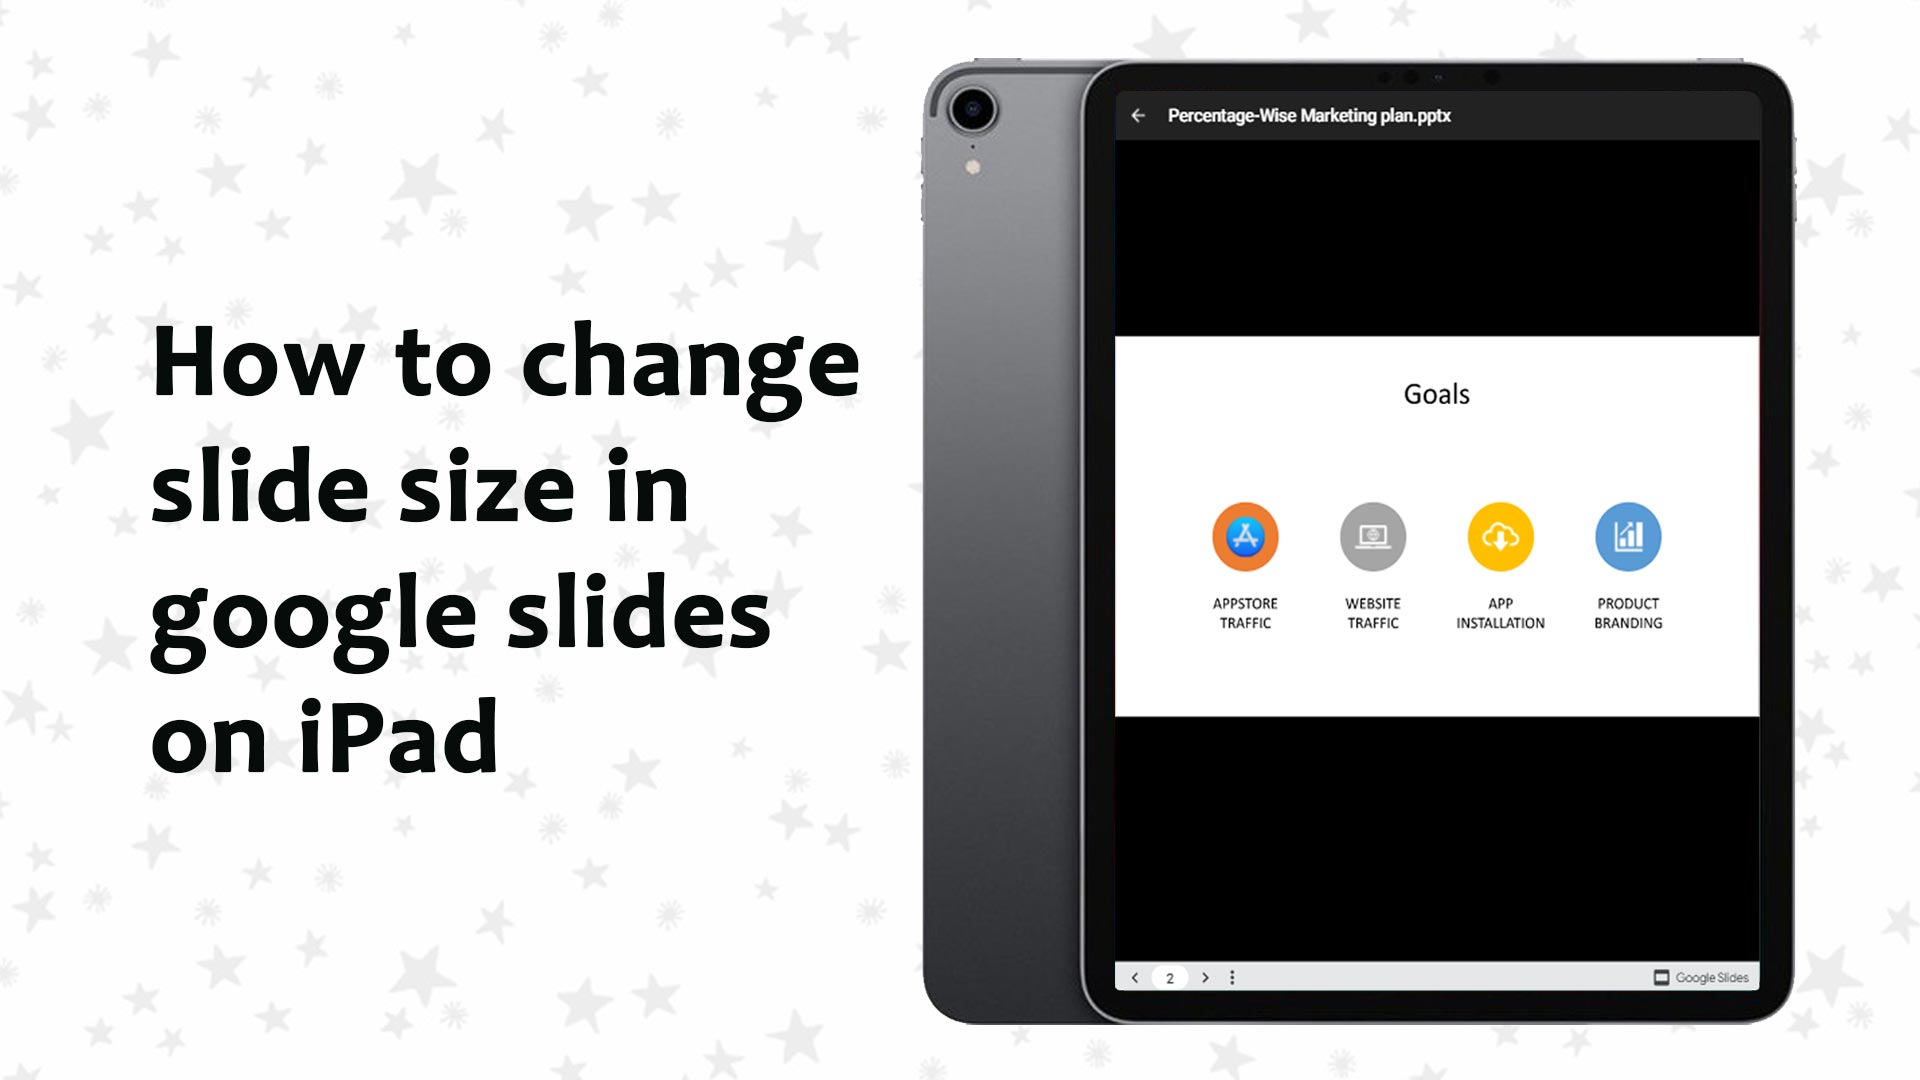 How to change slide size in google slides on iPad